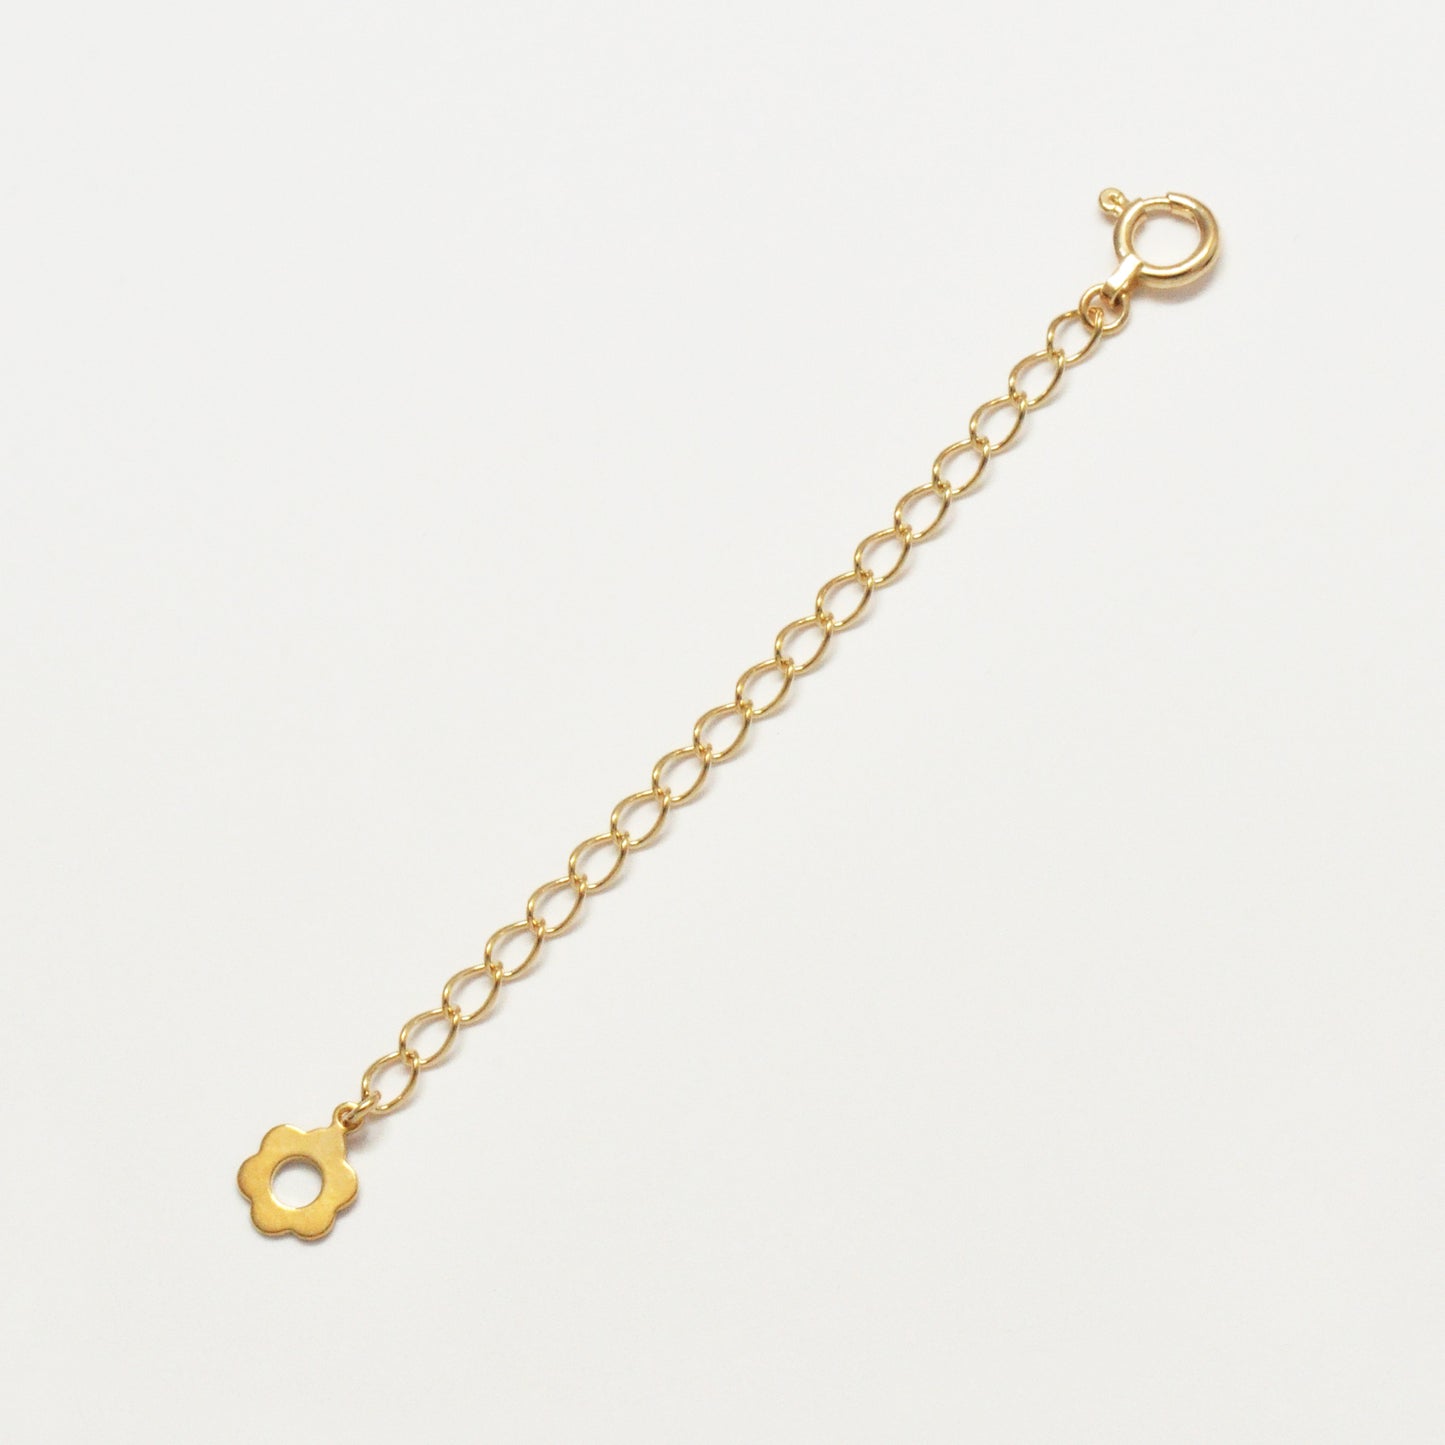 10K Chain Adjuster 5cm (Yellow Gold) - Product Image